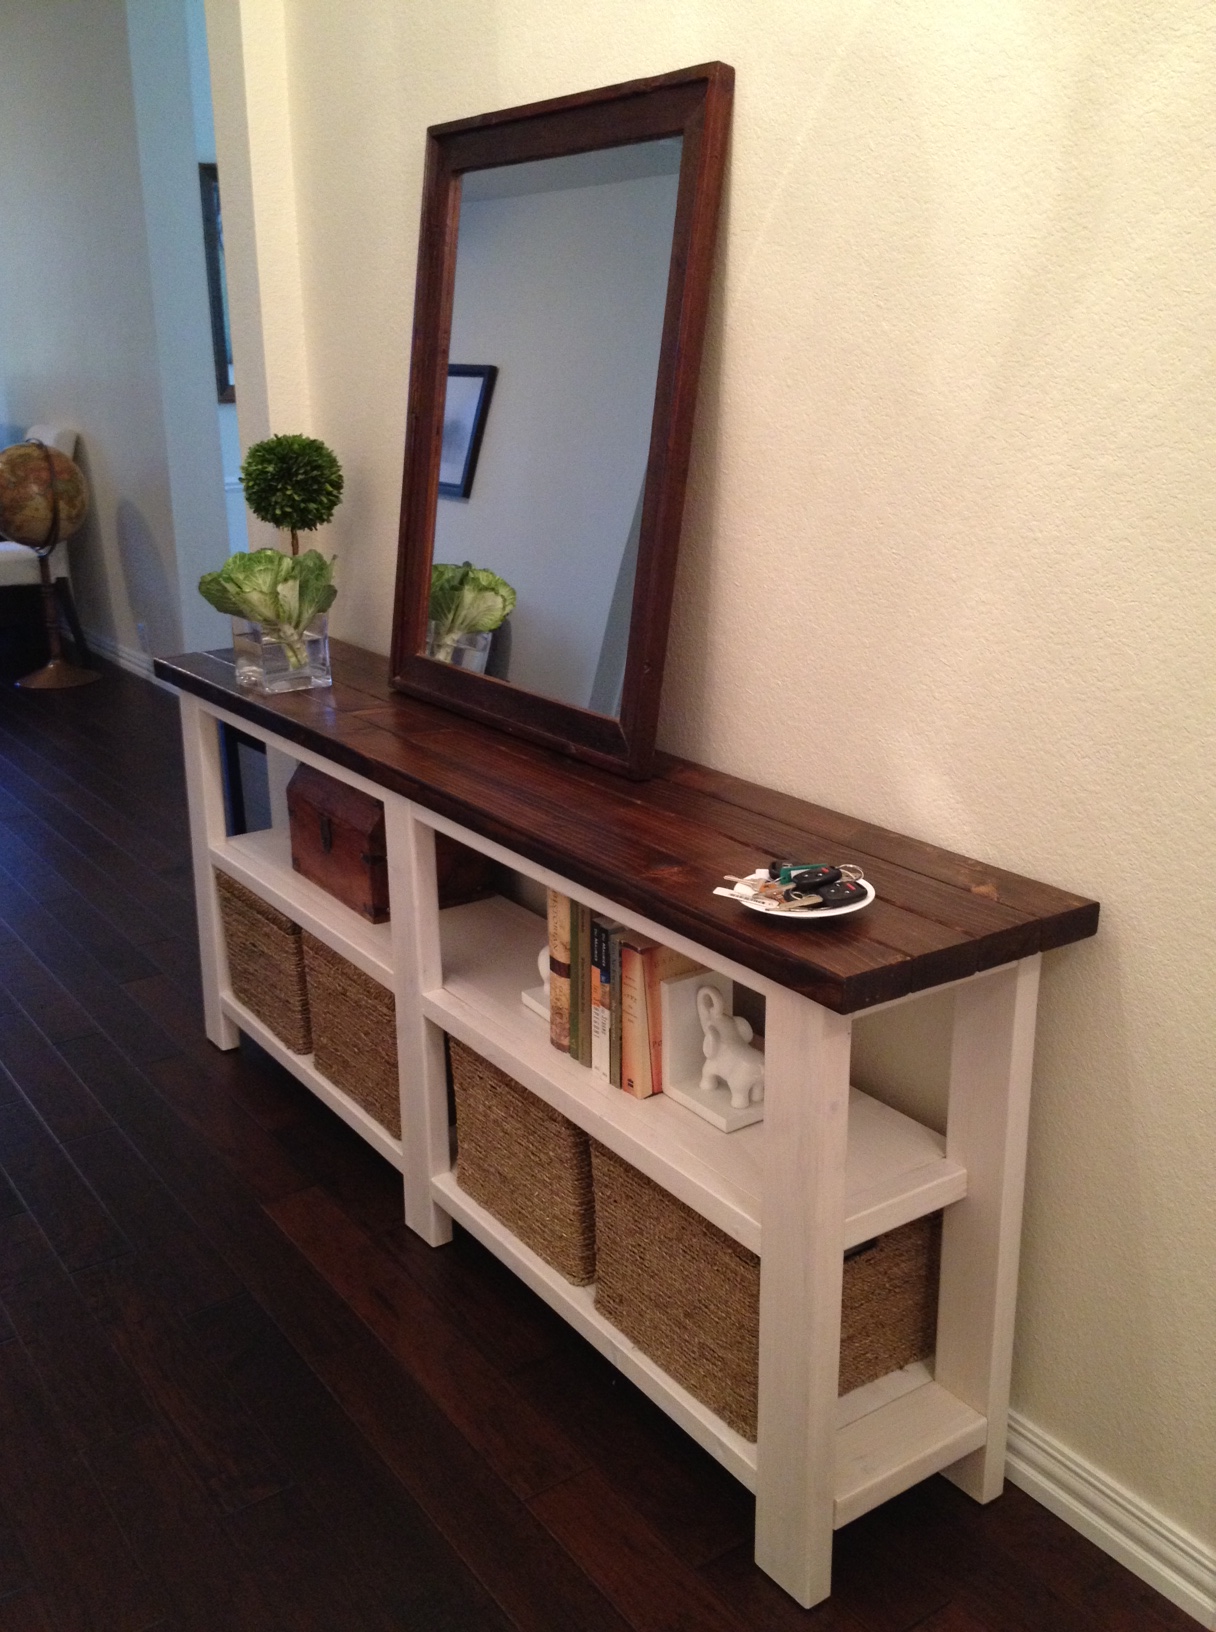 Rustic Chic Console Table | thelotteryhouse